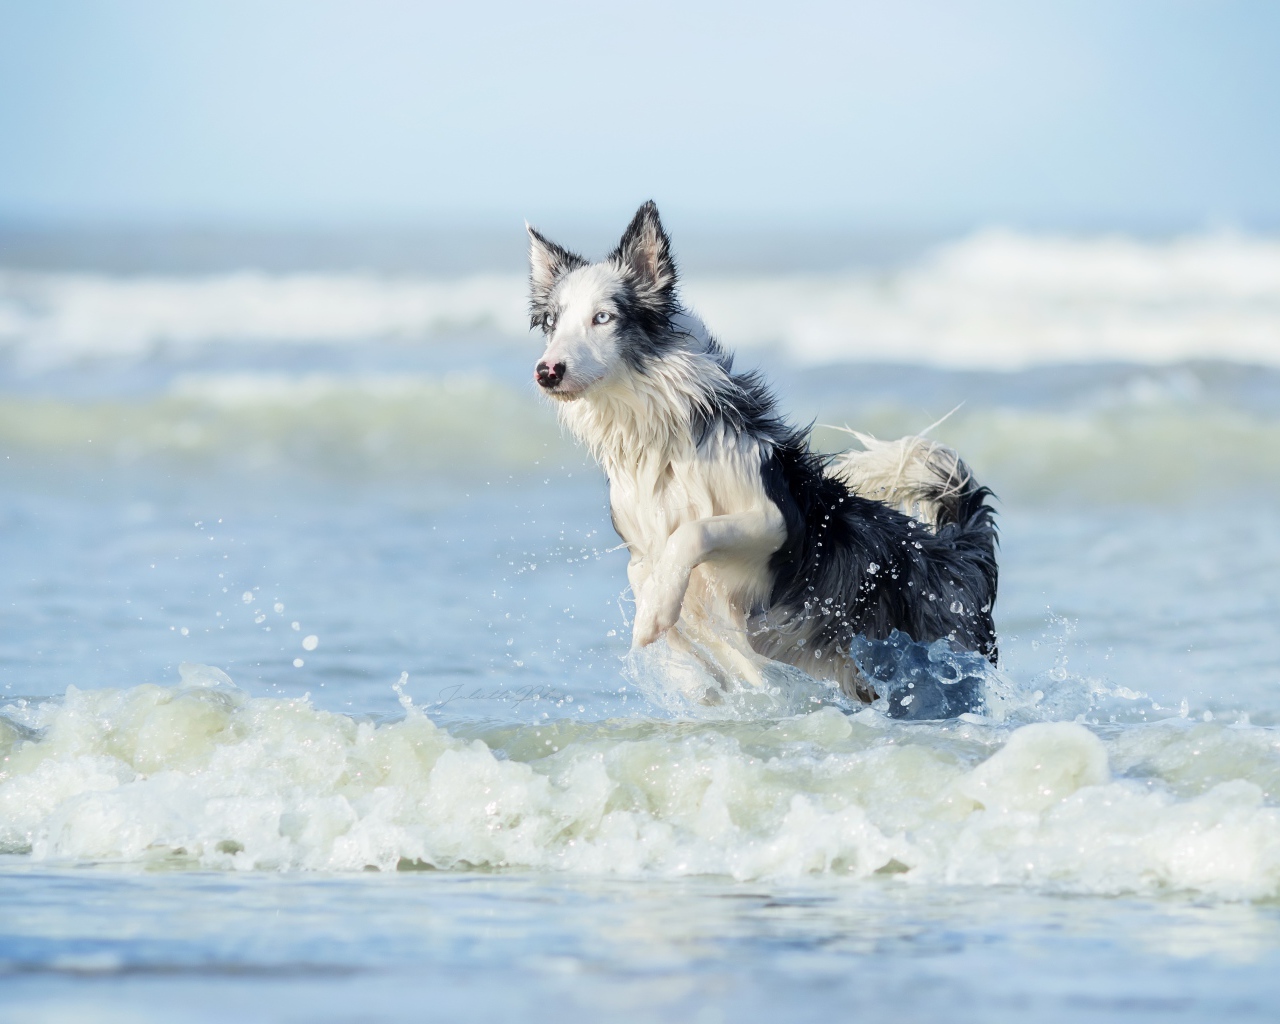 Border Collie breed dog runs in the water